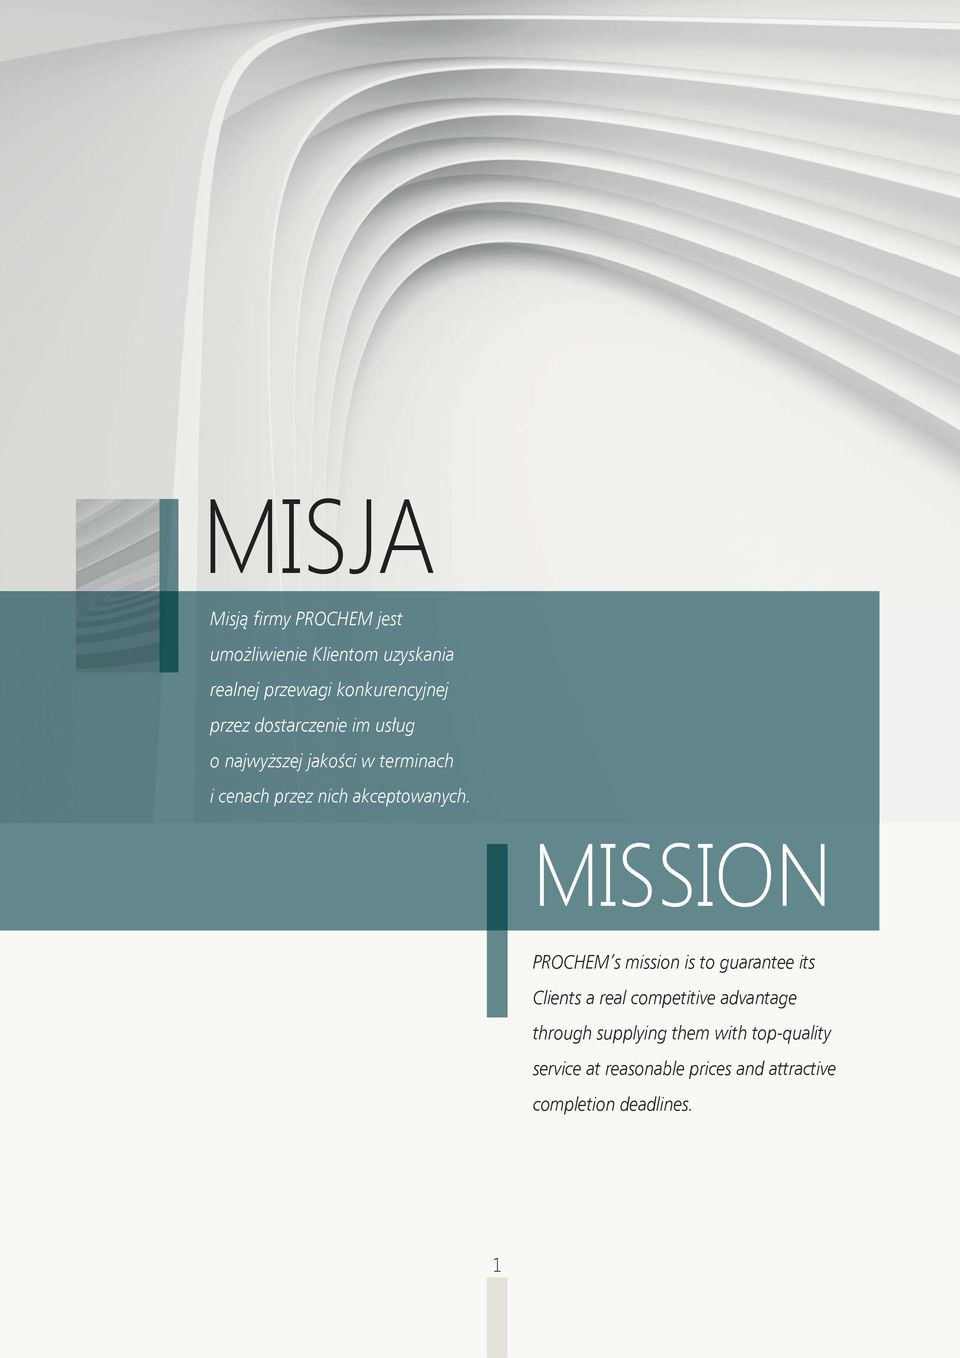 MISSION PROCHEM s mission is to guarantee its Clients a real competitive advantage through